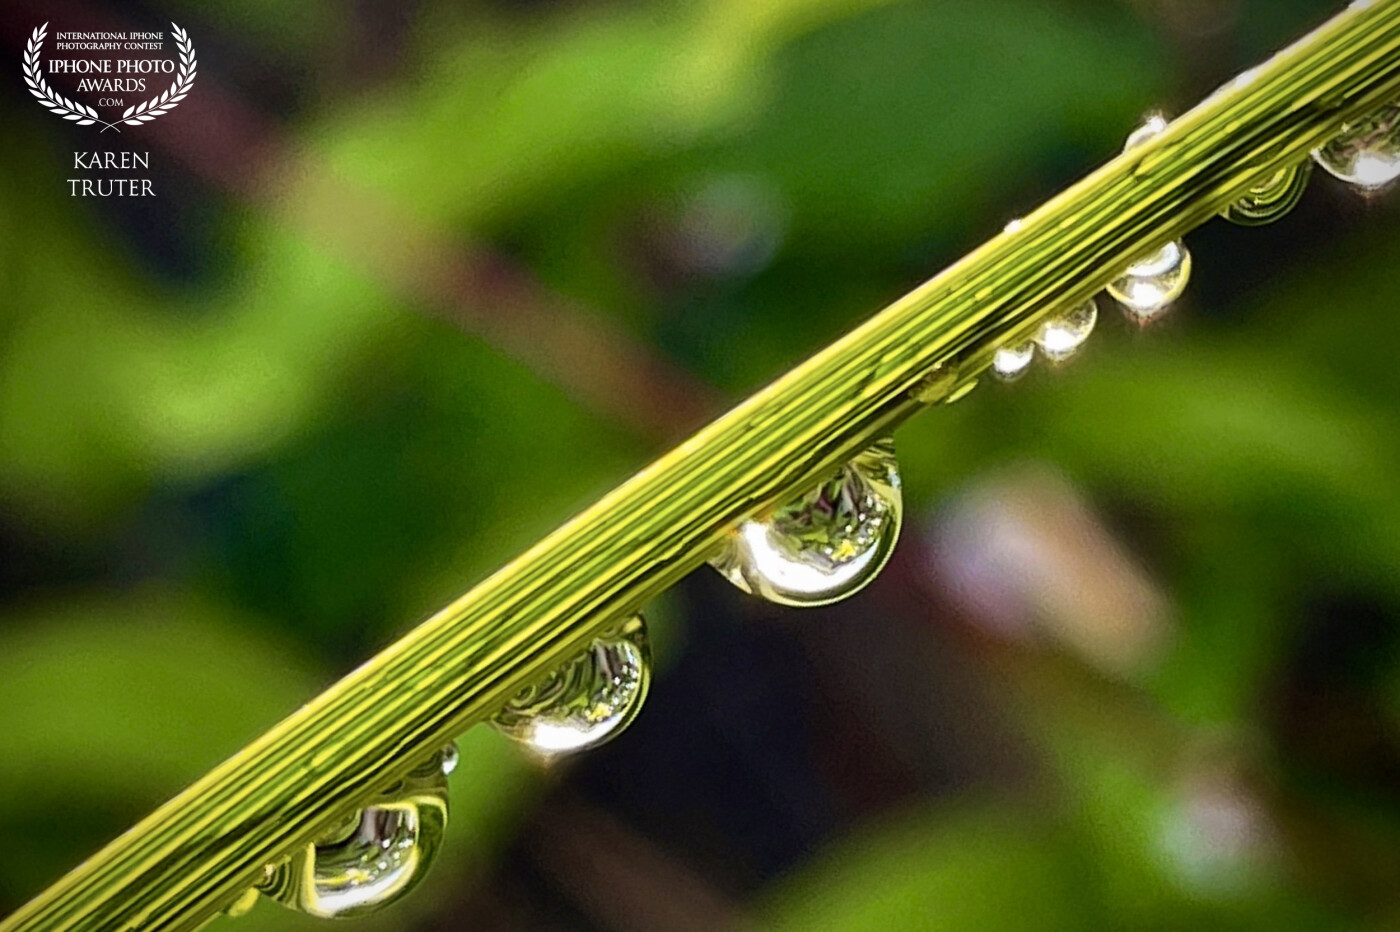 After the summer rain, I went out to capture the drops and this turned out to be my favourite macro shot.